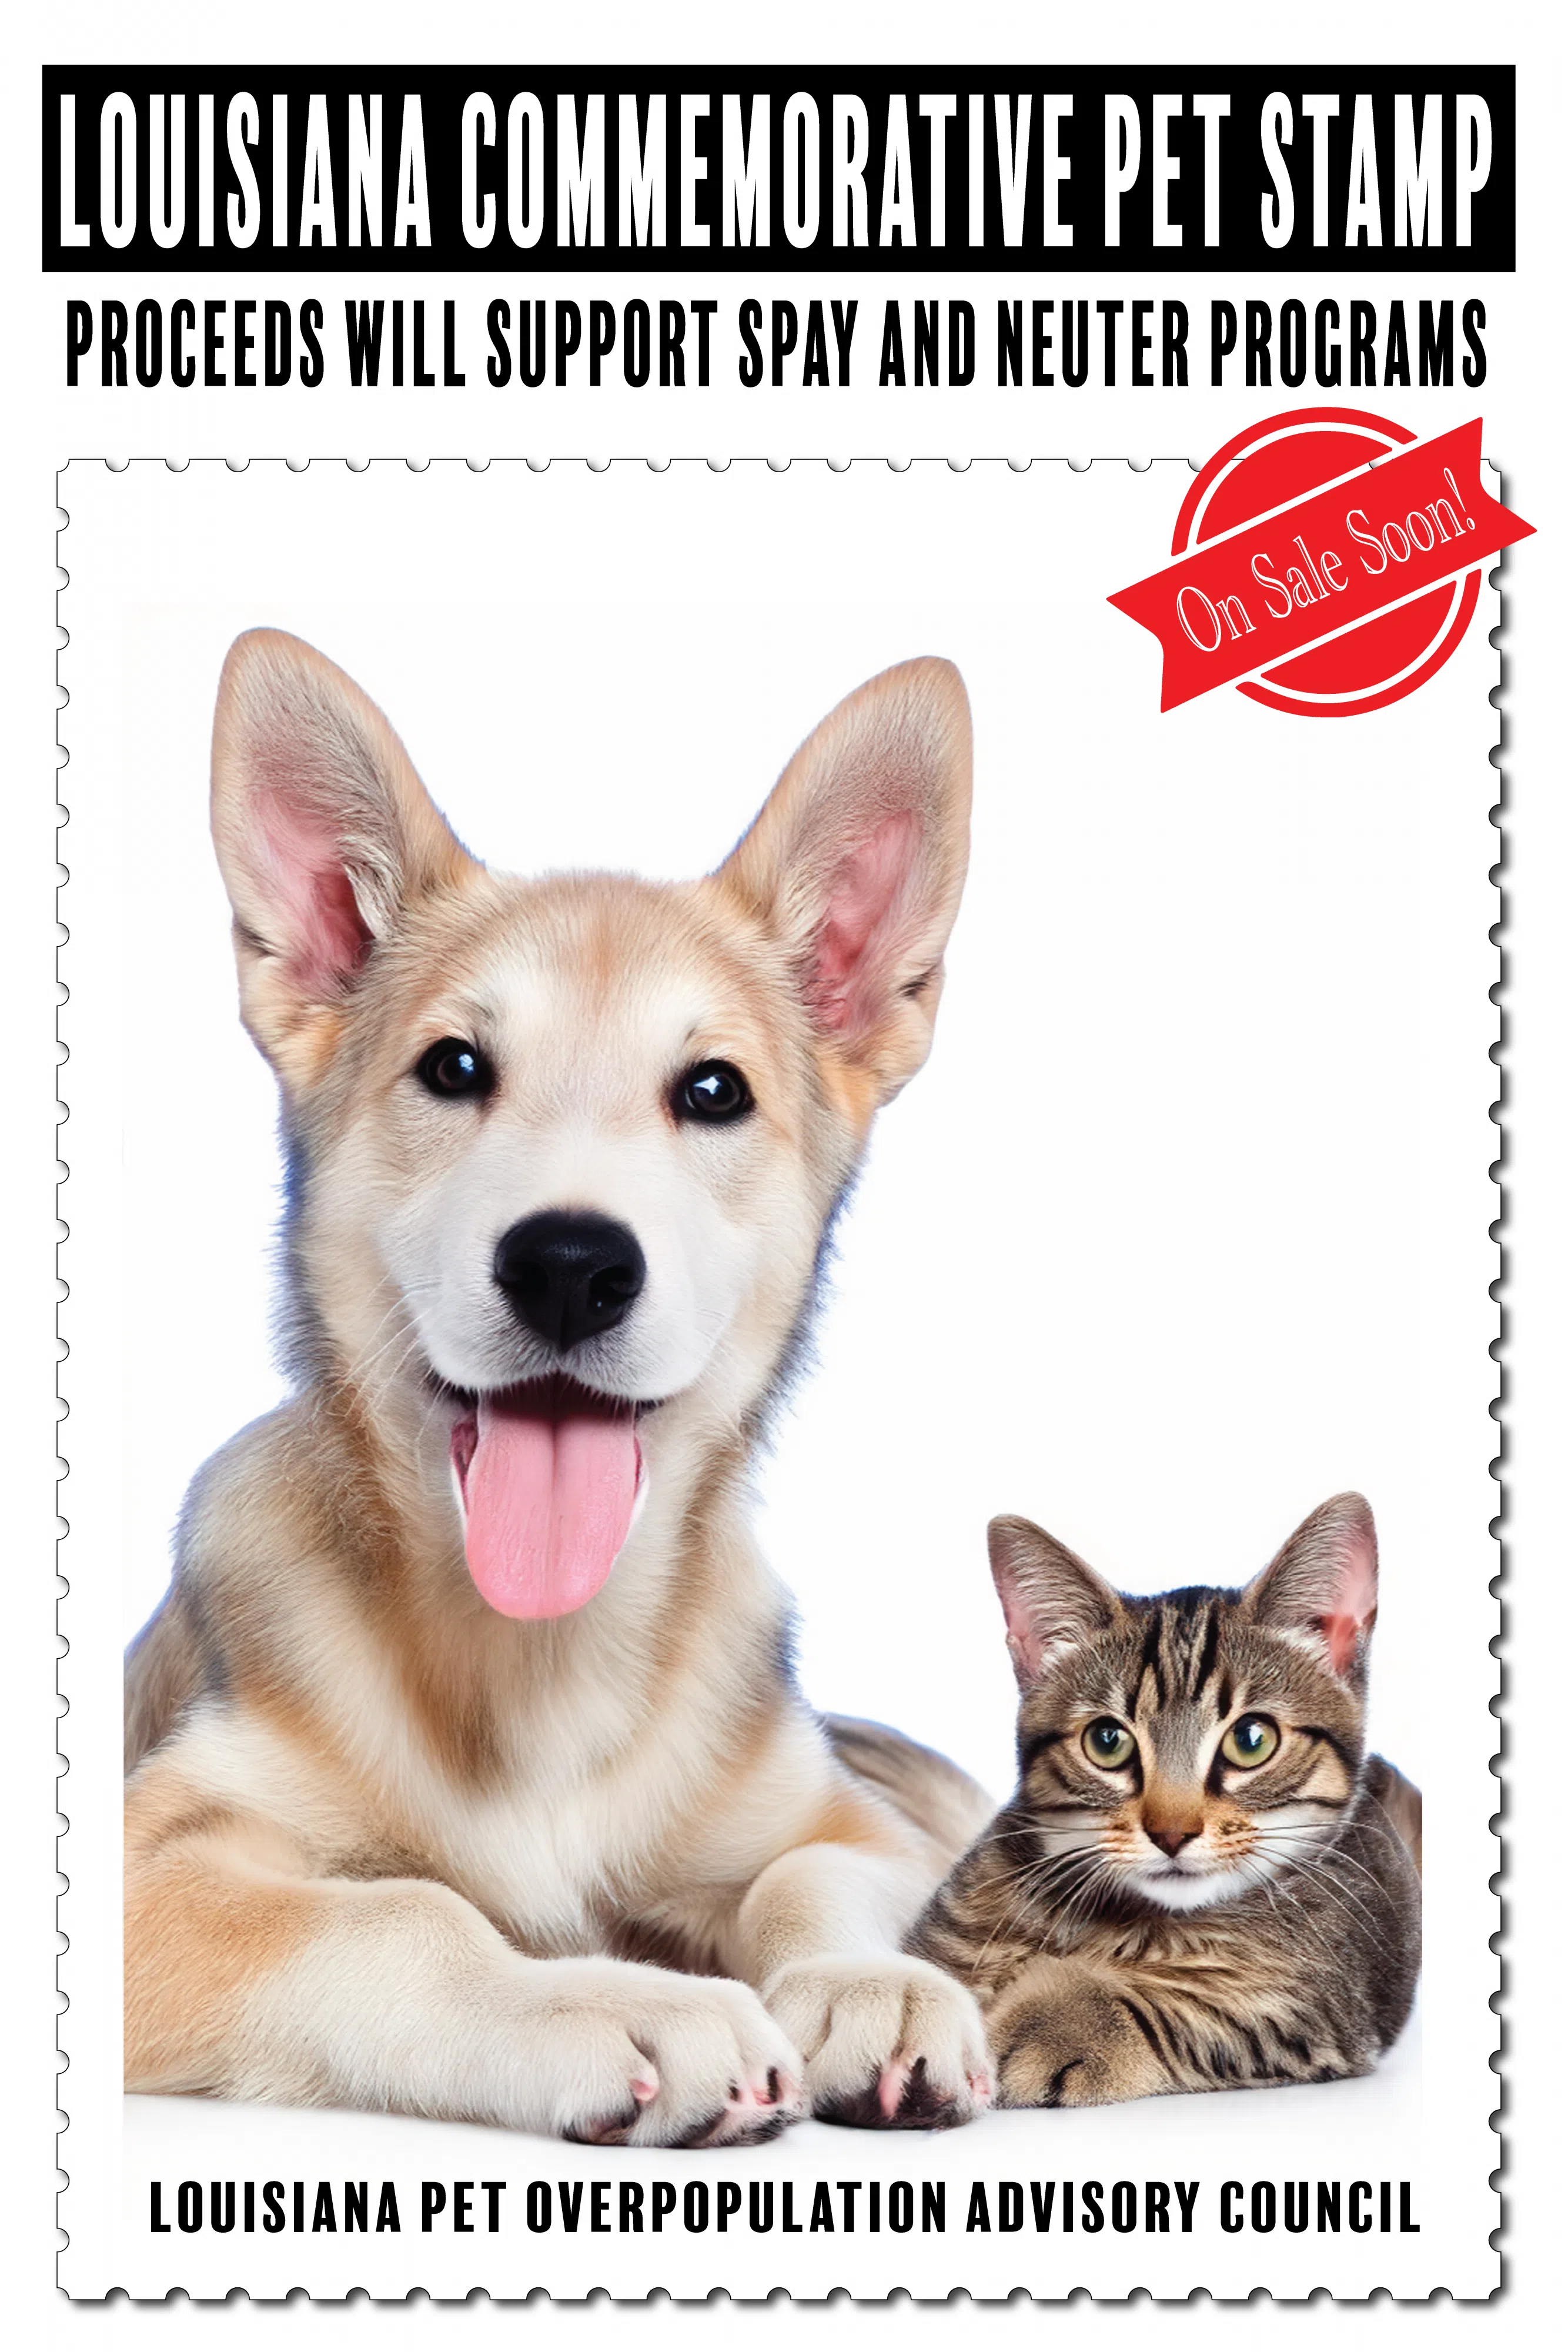 Commemorative pet stamps designed to help with overpopulation